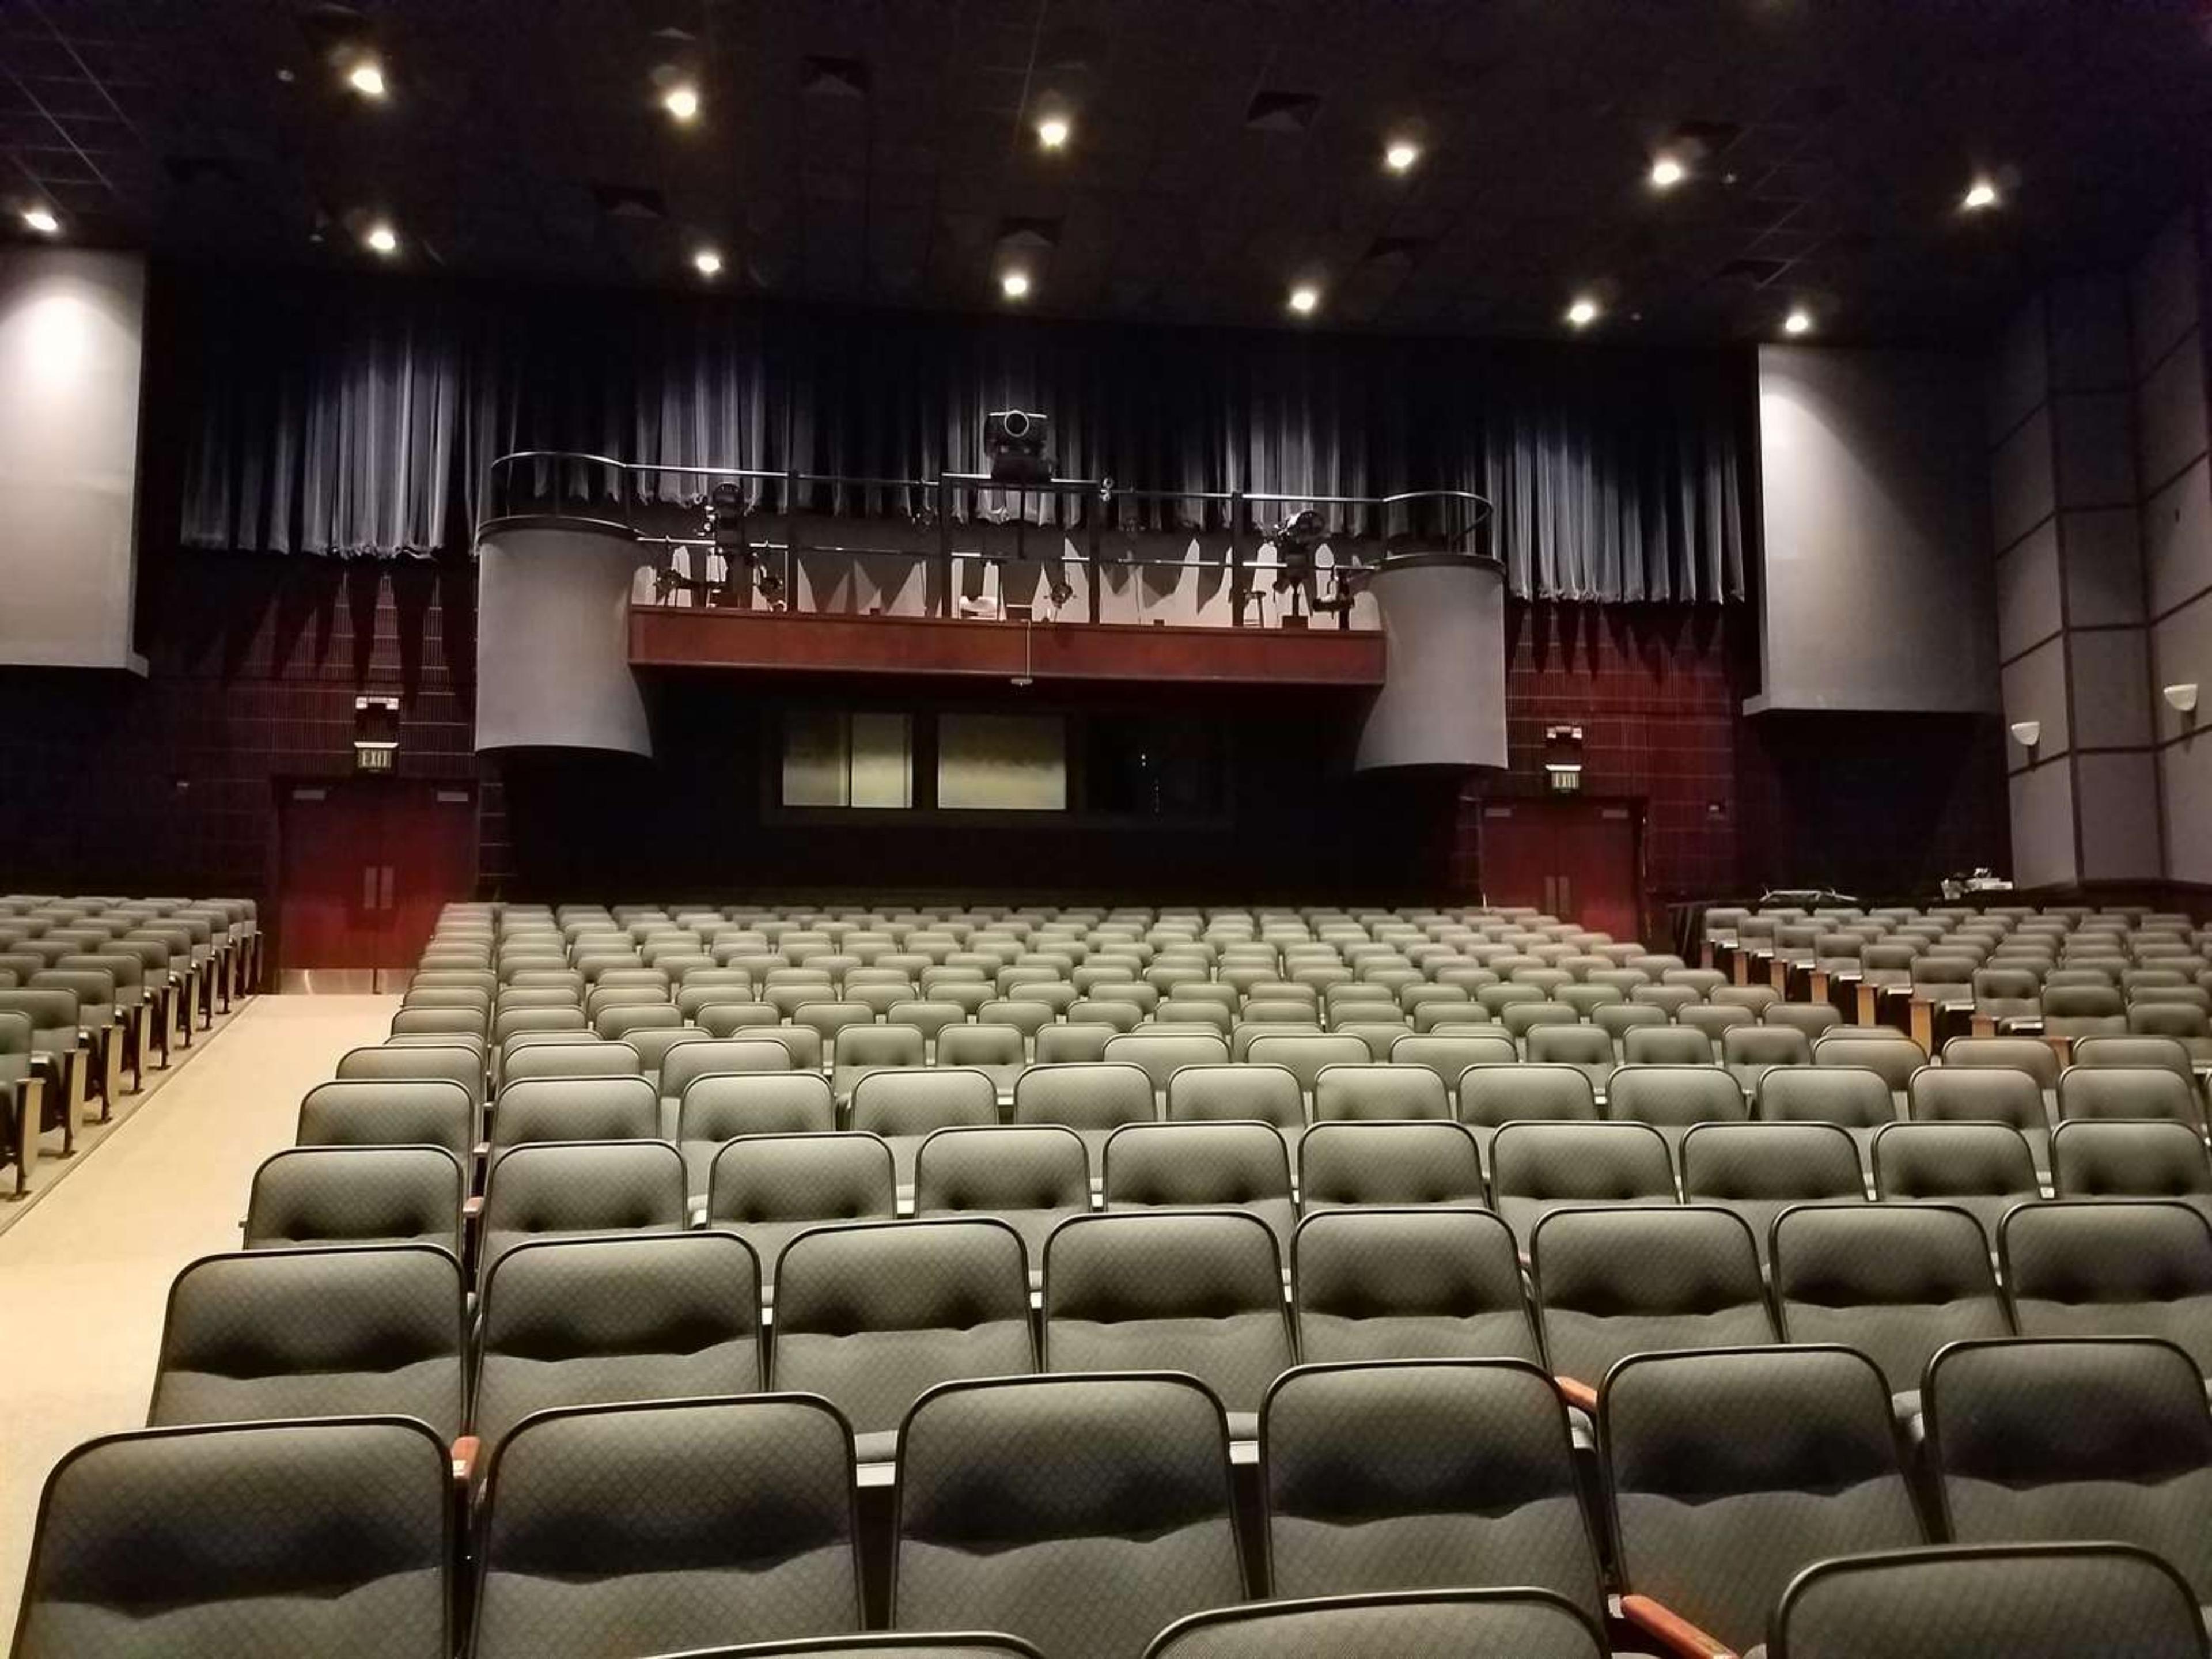 Dougherty Valley Performing Arts Center